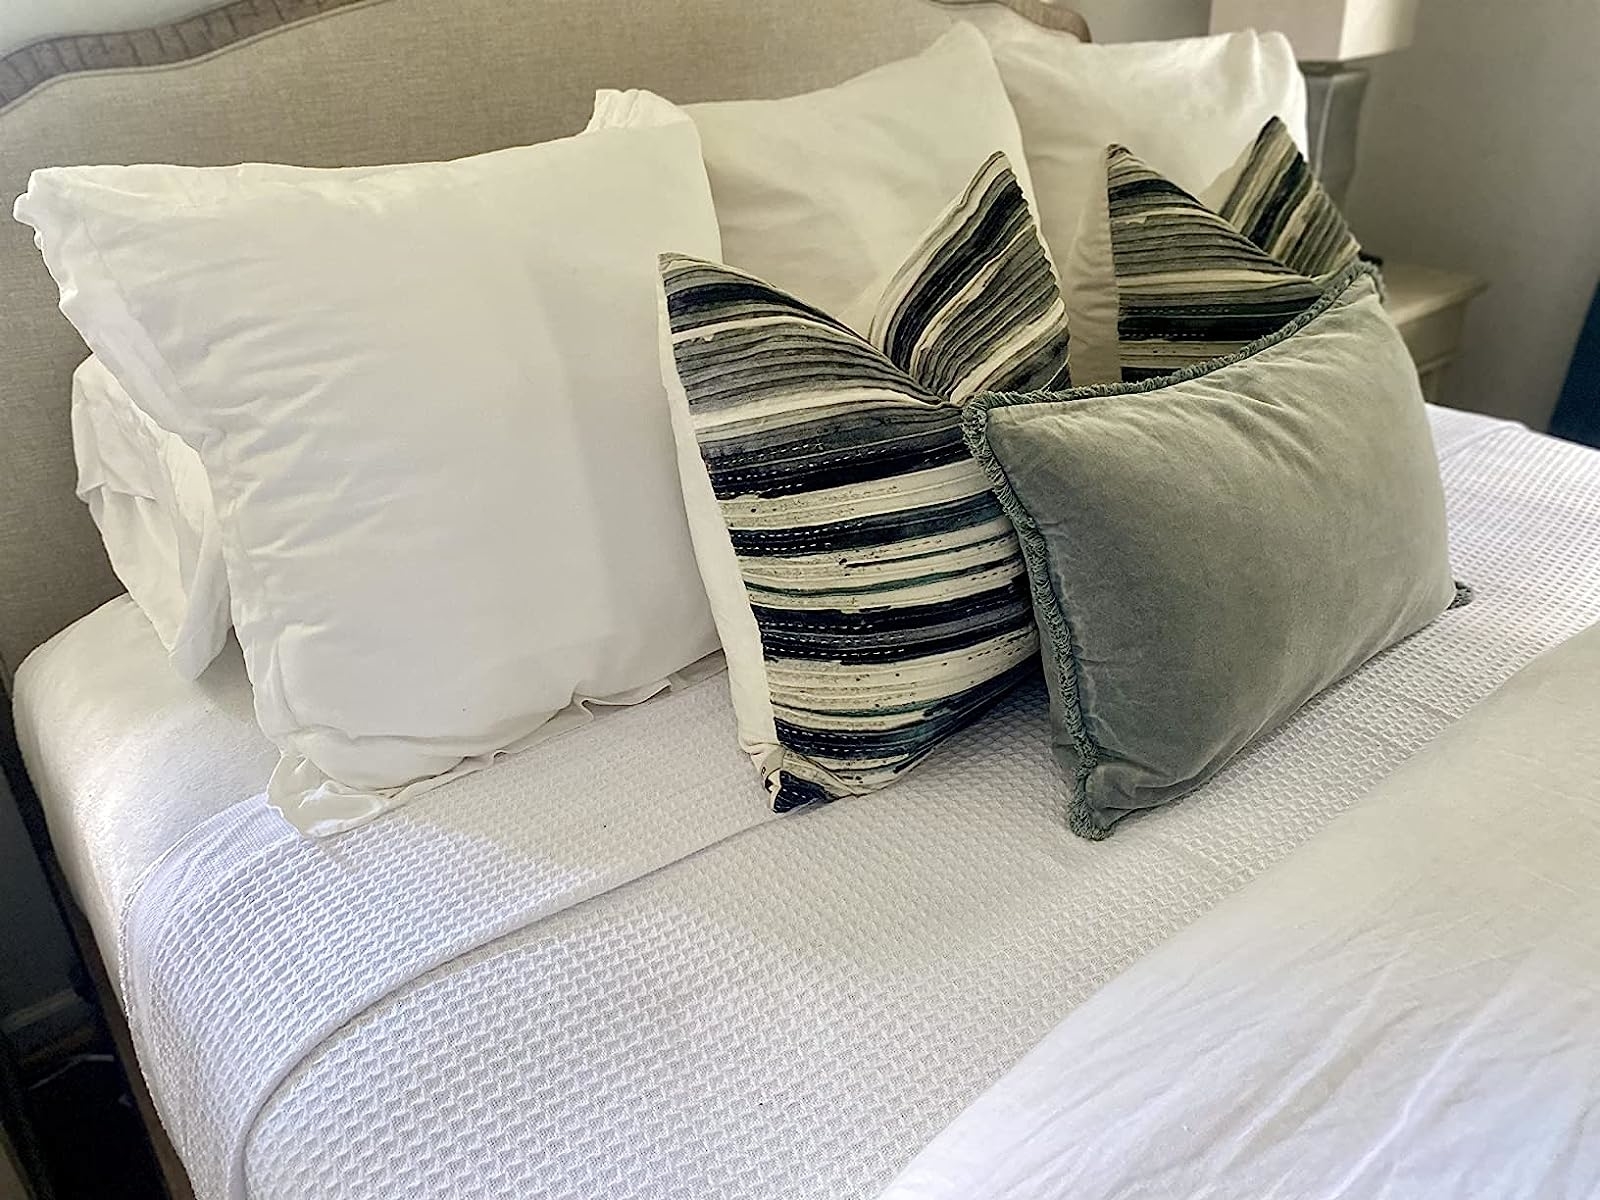 Reviewer image of the blanket on their bed with gray and white bedding